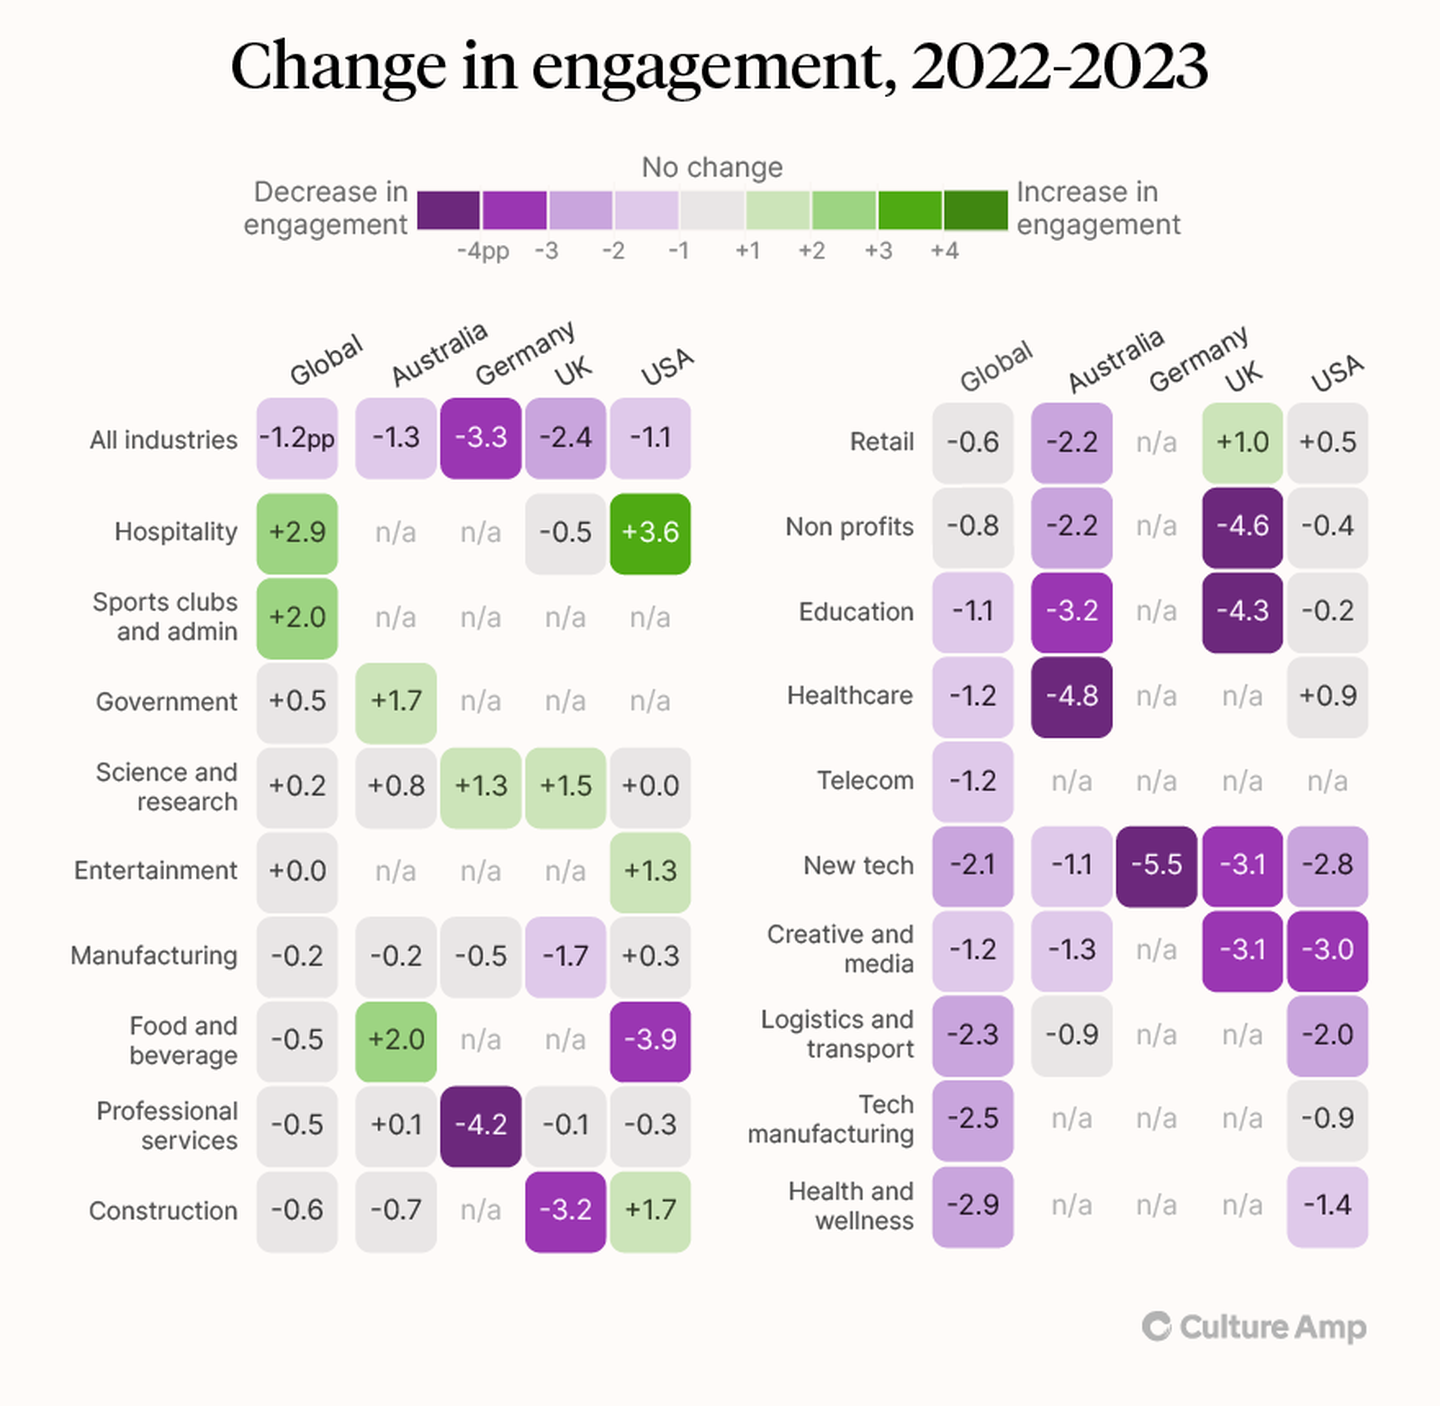 Chart depicting the change in engagement trends between 2022 and 2023